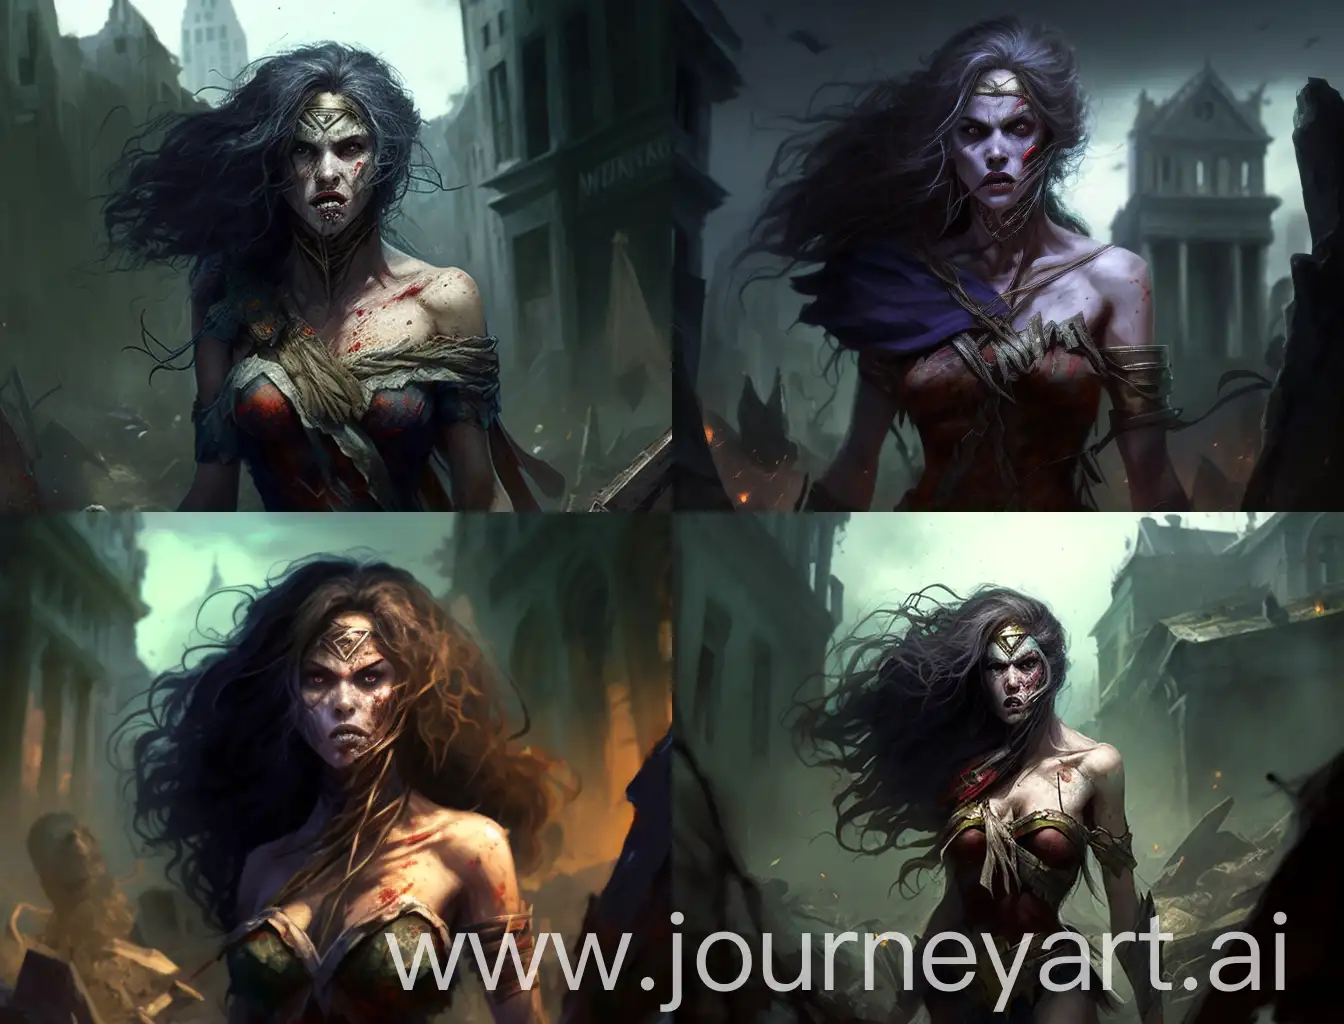 Wonder Woman has turned into a zombie and her hair is hanging forward and she's disheveled and waving in the wind, and her clothes are dirty and torn and she's half-witted and weak trying to walk around the ruined city. There are some zombies around them,real,8k